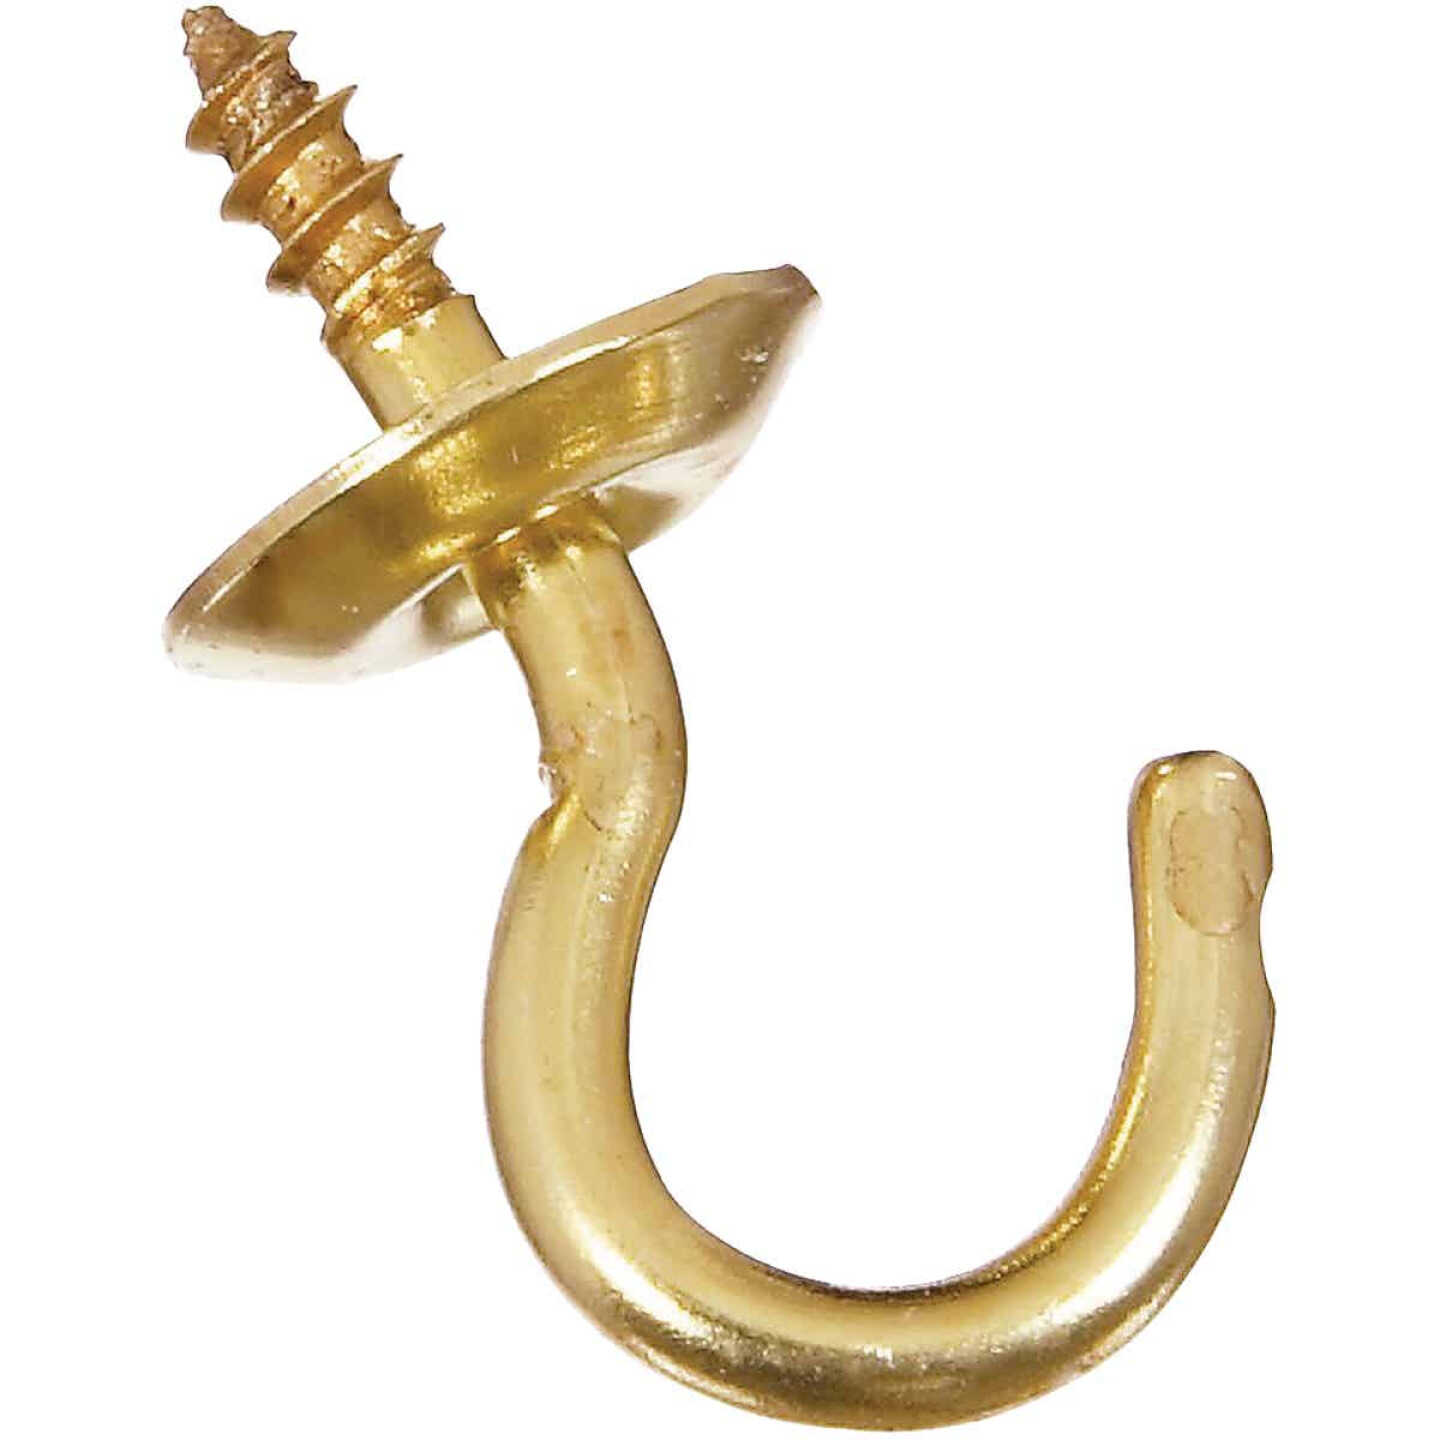 National V2021 1/2 In. Solid Brass Series Cup Hook (6 Count) Image 1